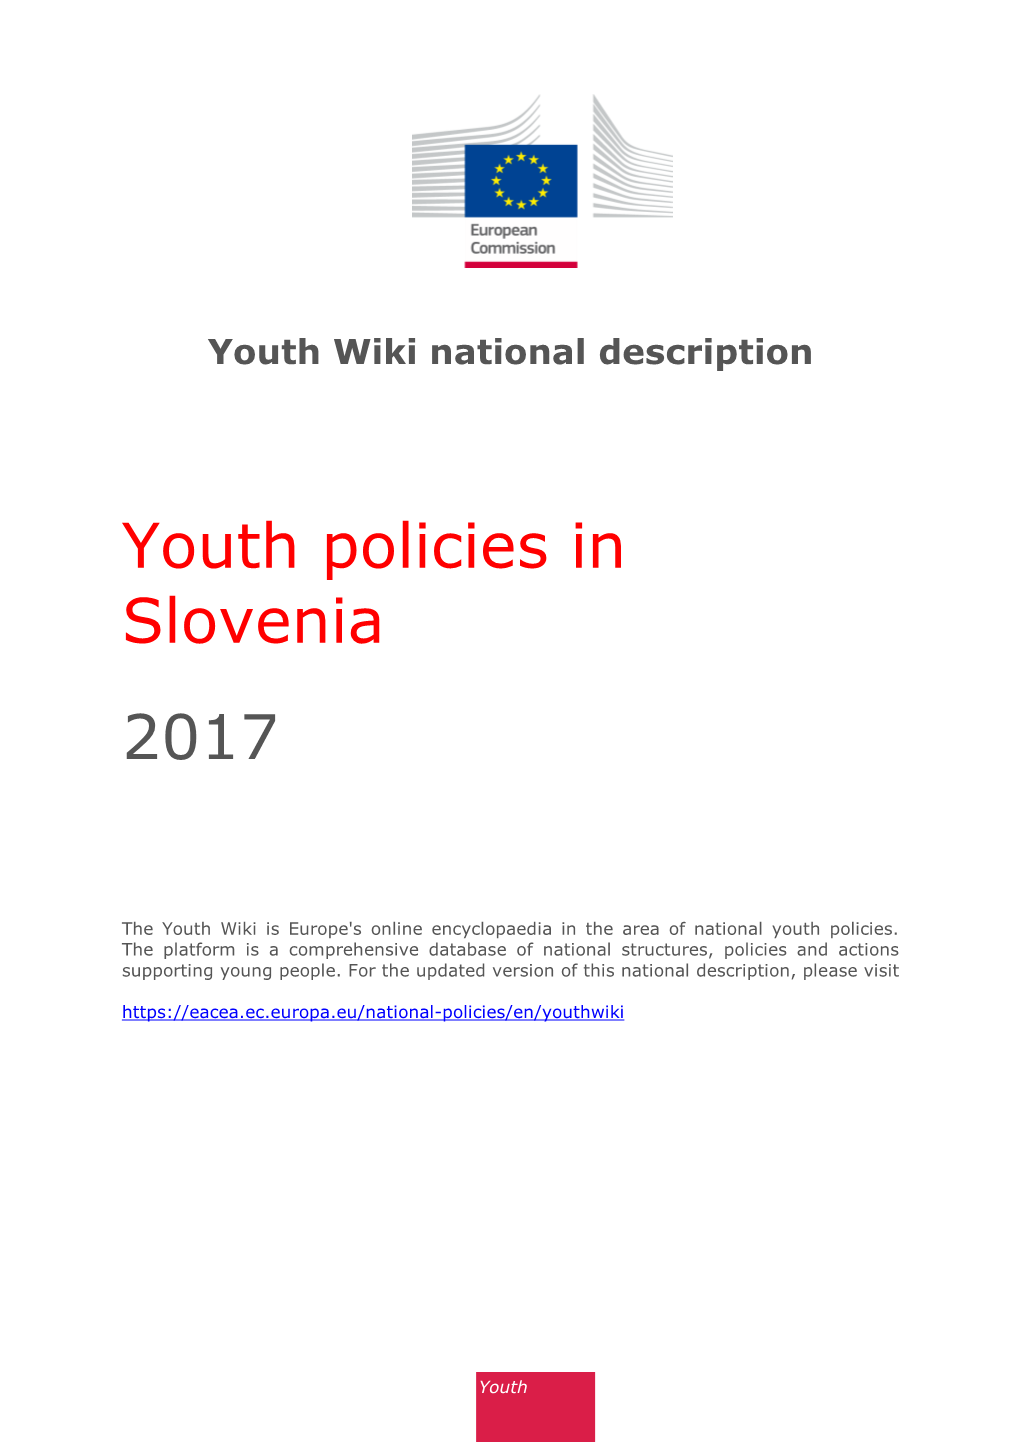 Youth Policies in Slovenia